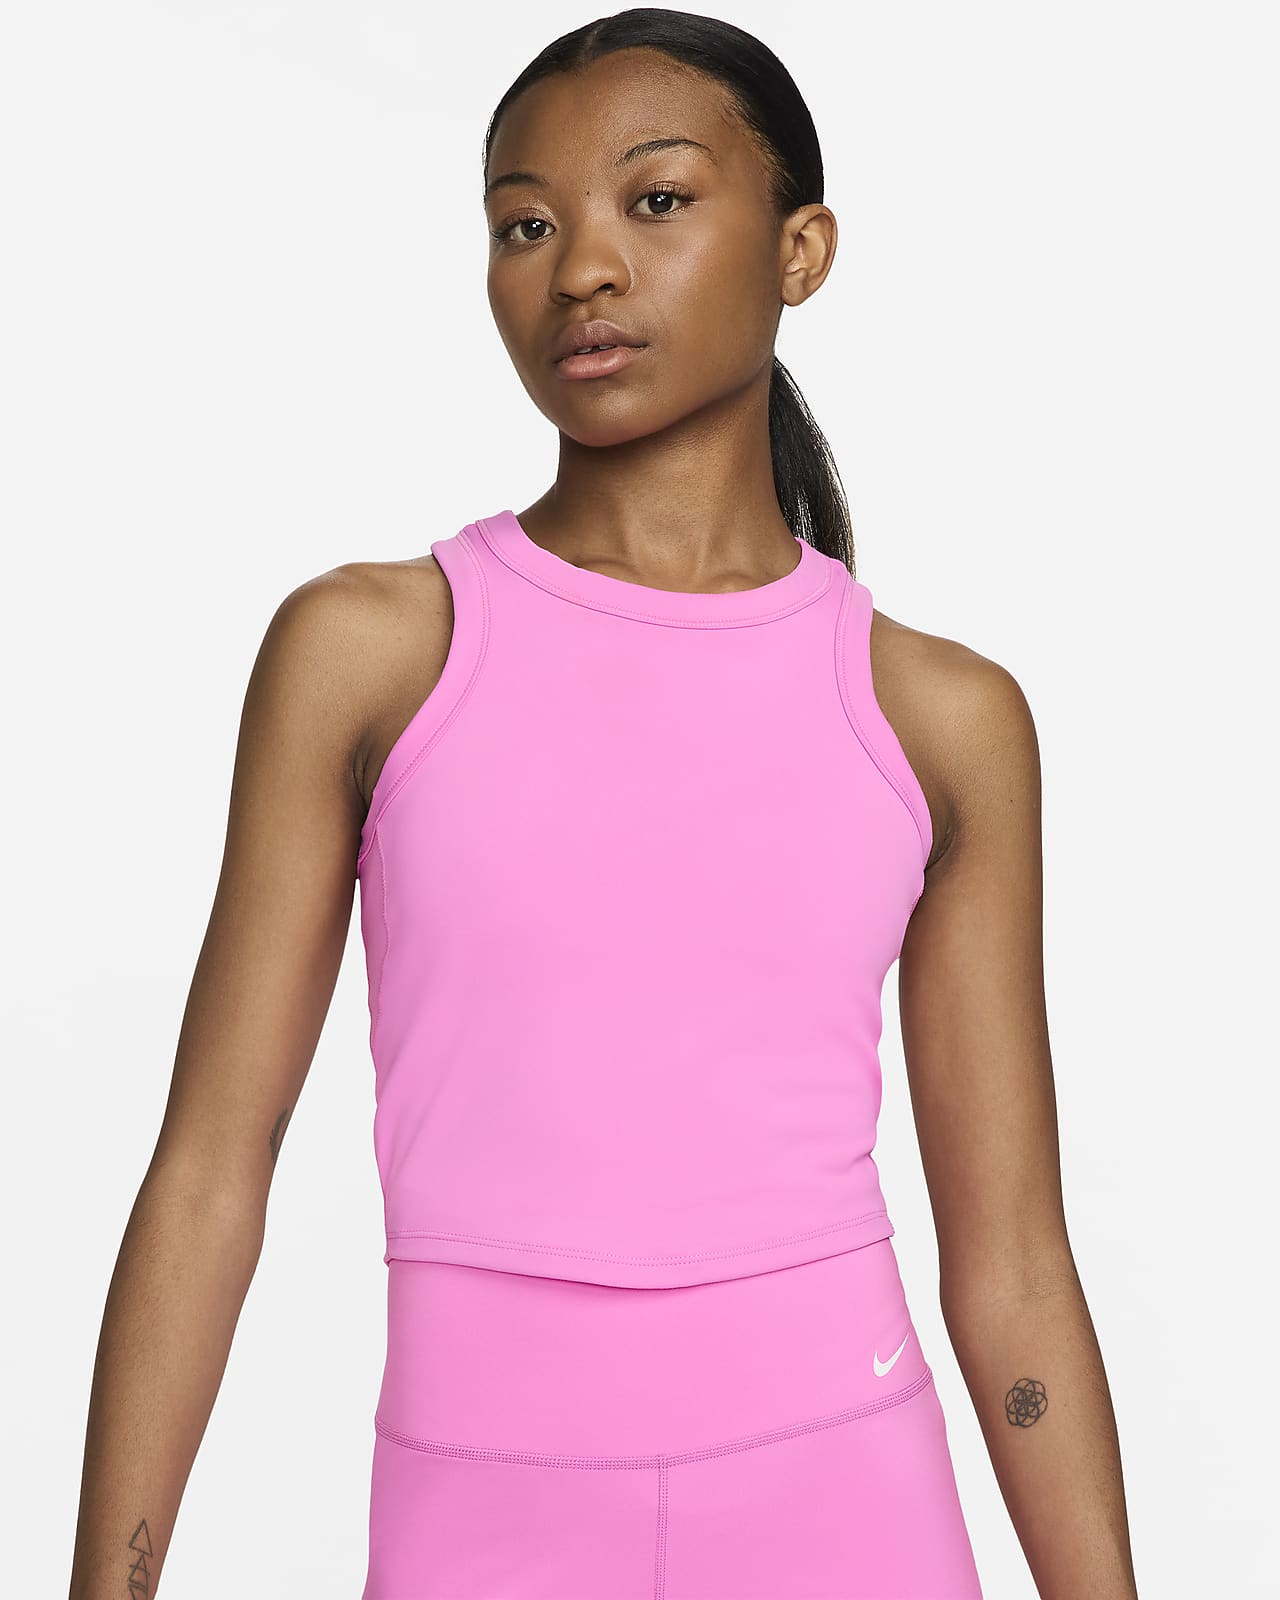 Nike One Fitted Women's Dri-FIT Cropped Tank Top.